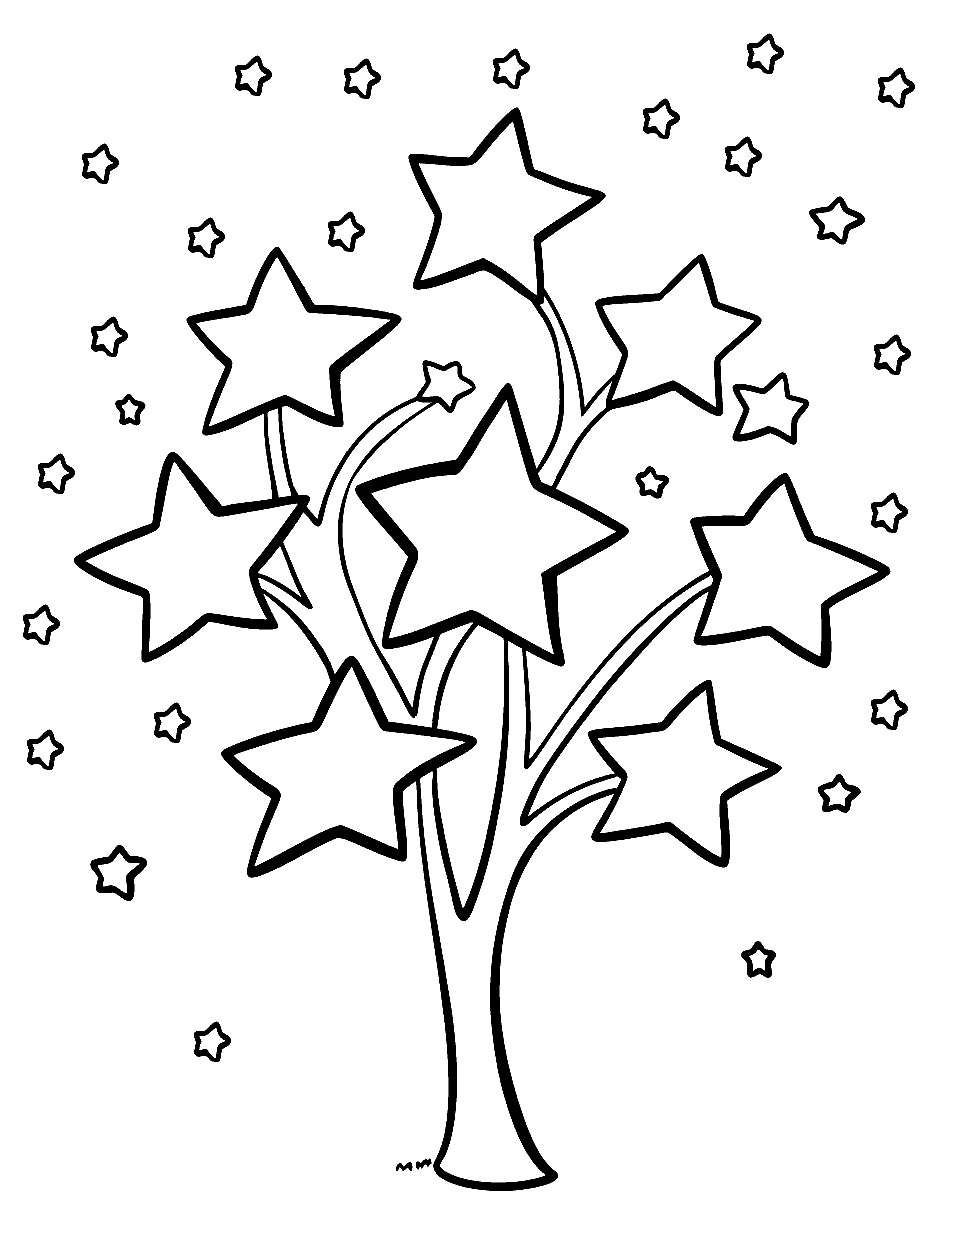 Star Fruit Tree Coloring Page - A tree with star-shaped fruits hanging from its branches.